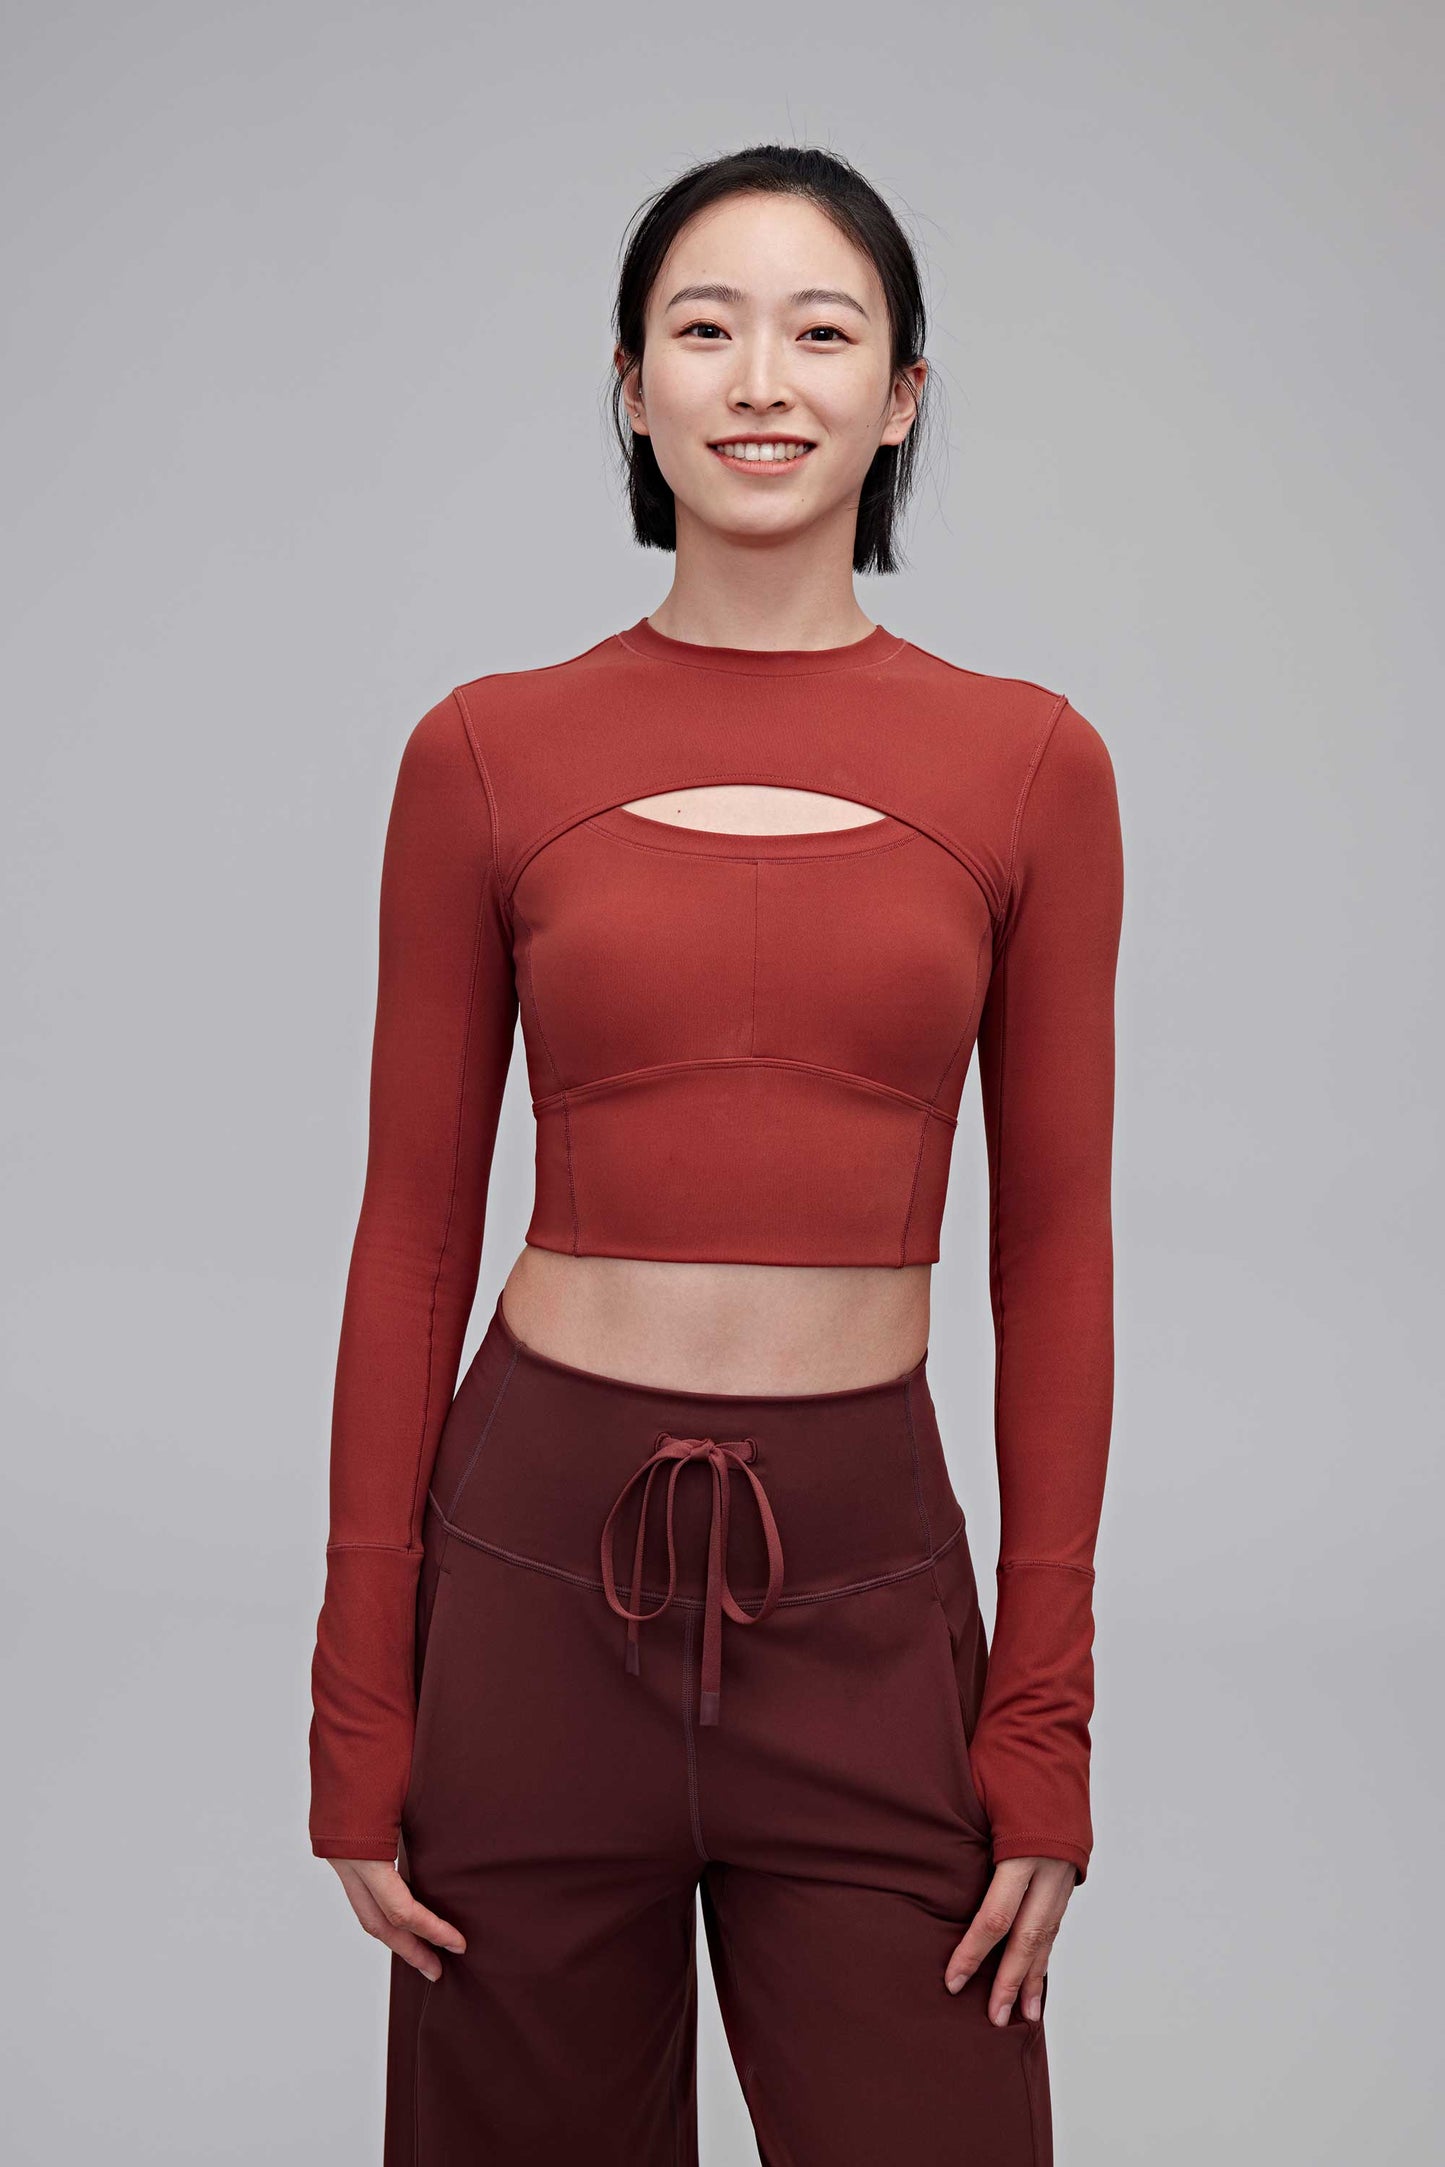 A woman wearing a red top